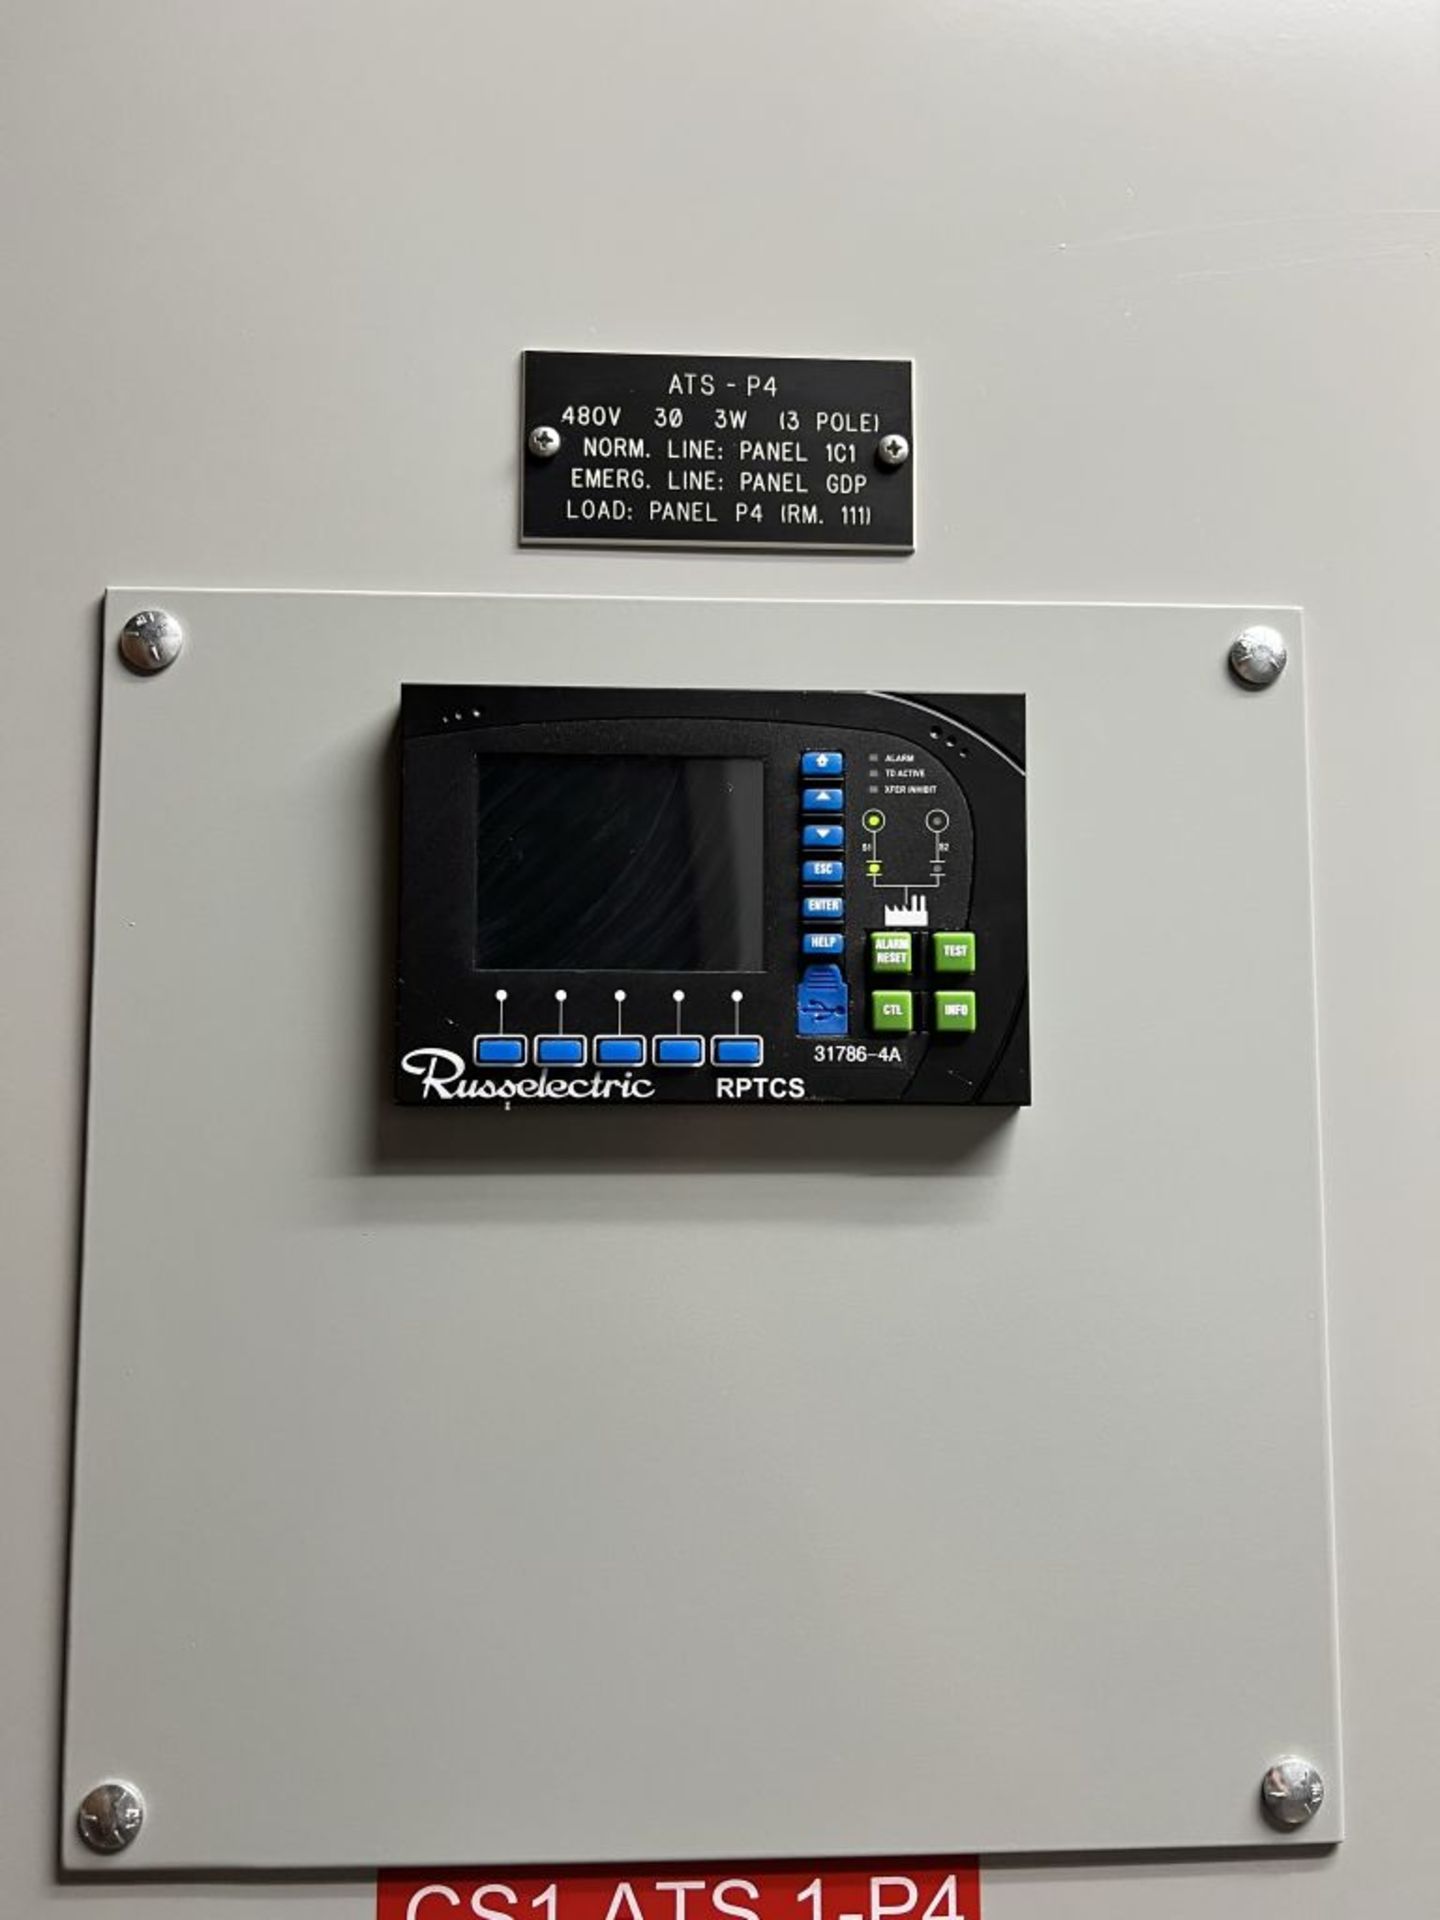 Charlotte, NC - Automatic Russelectric Transfer Switch - Image 3 of 7